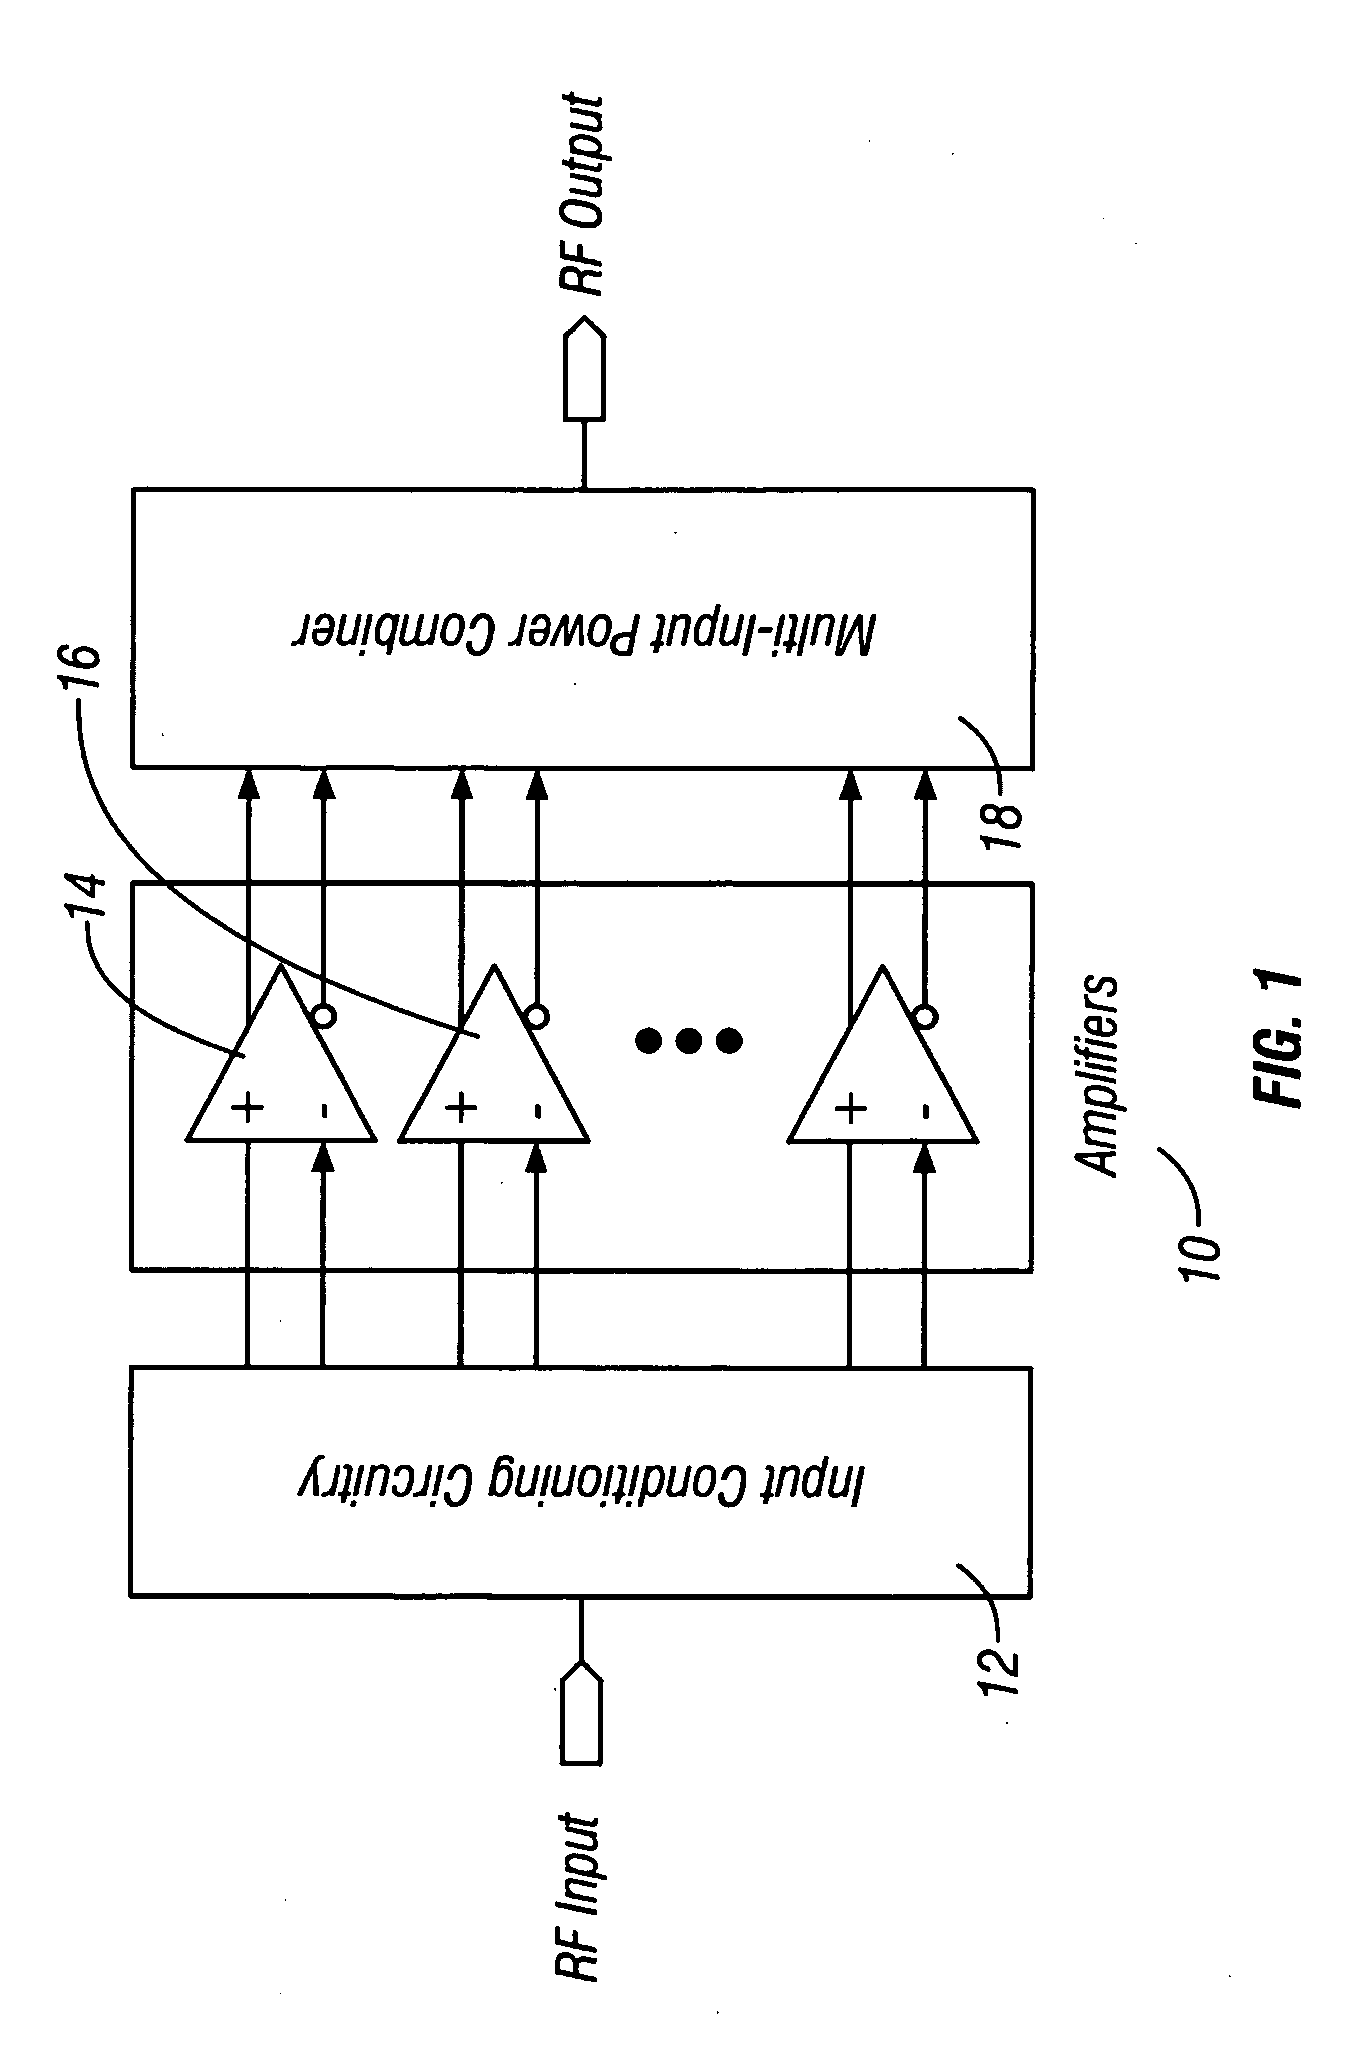 Method and apparatus for an improved power amplifier